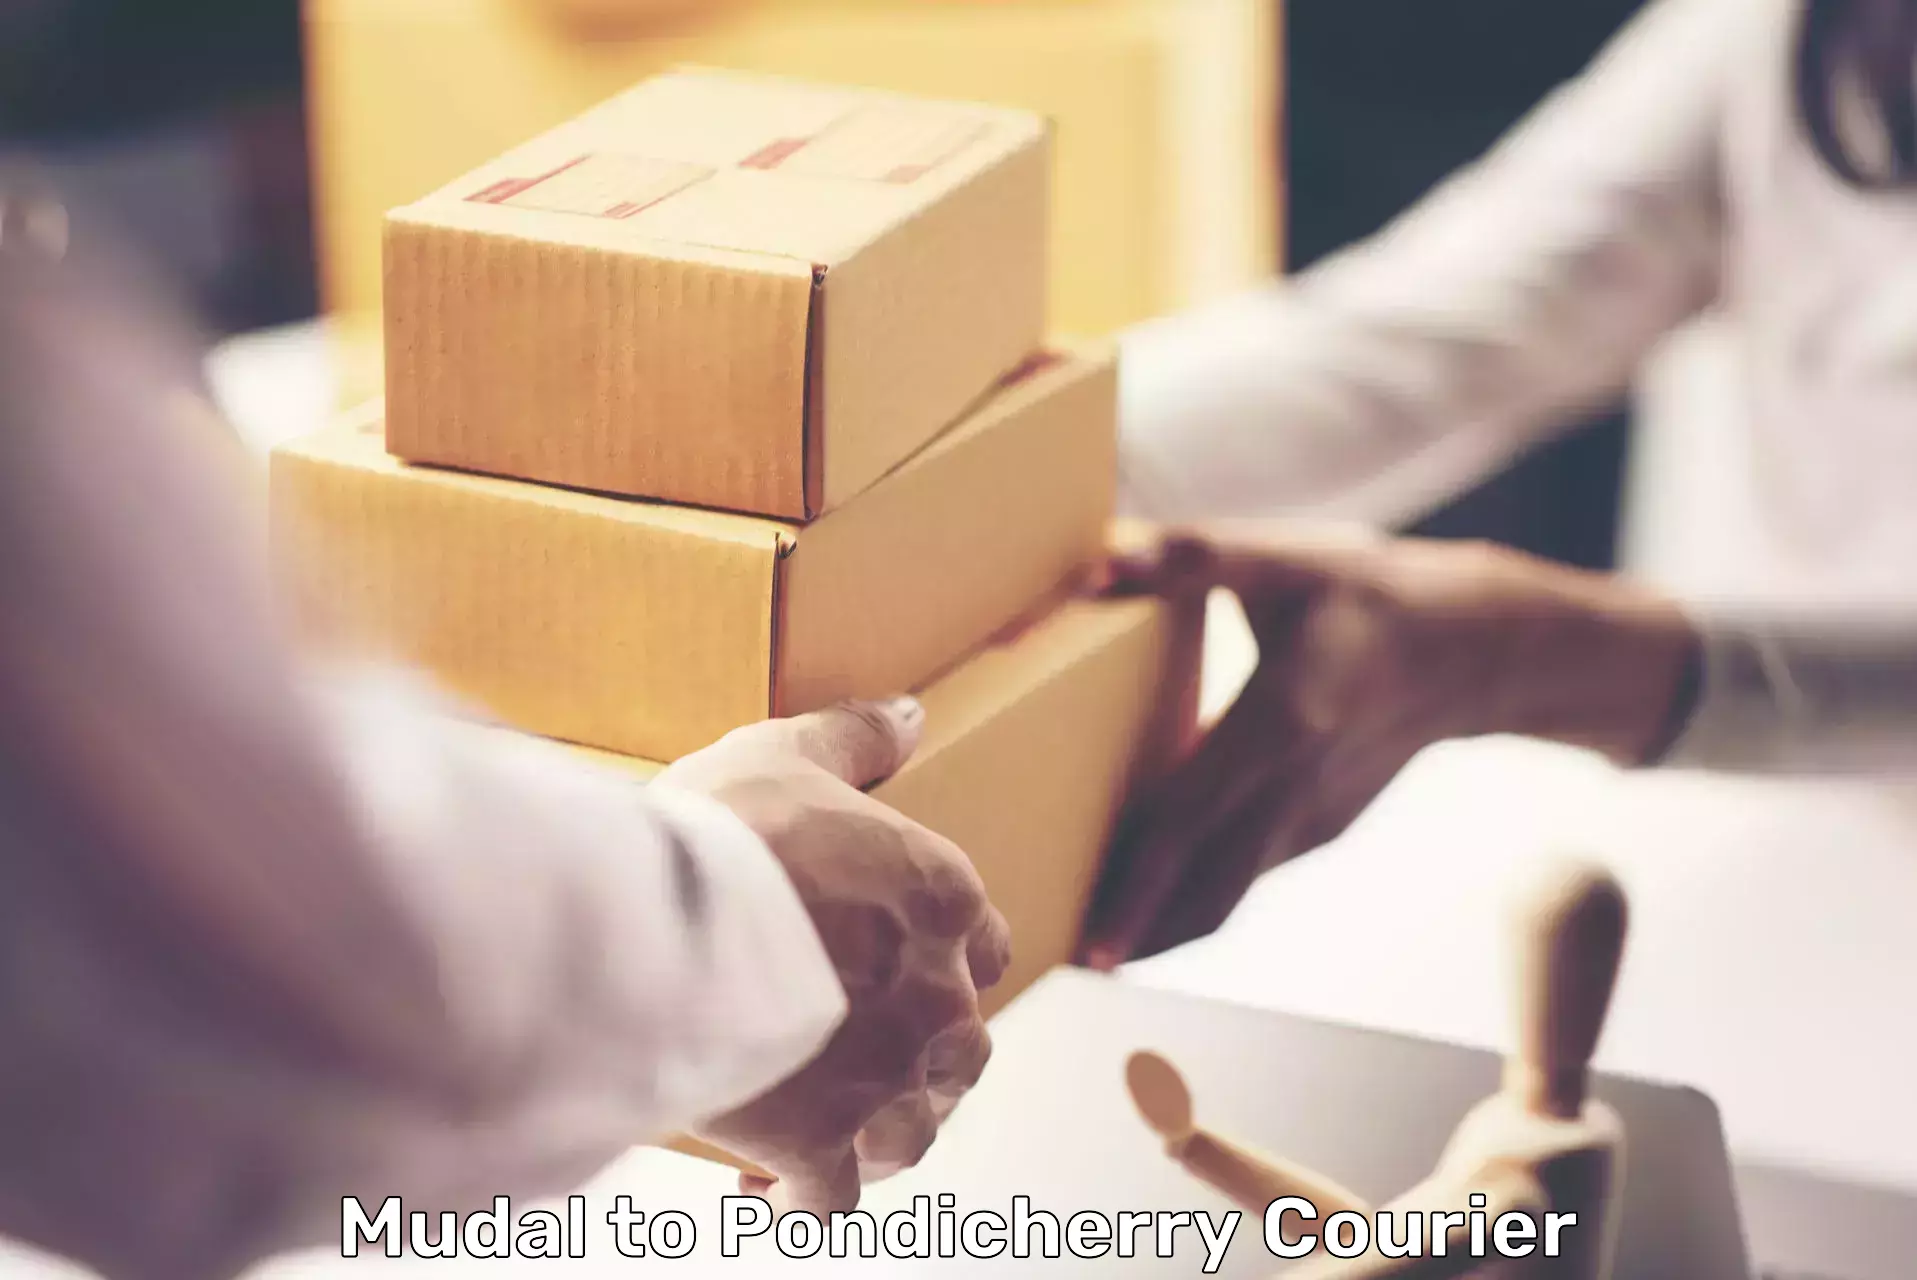 Package delivery network Mudal to Metttupalayam